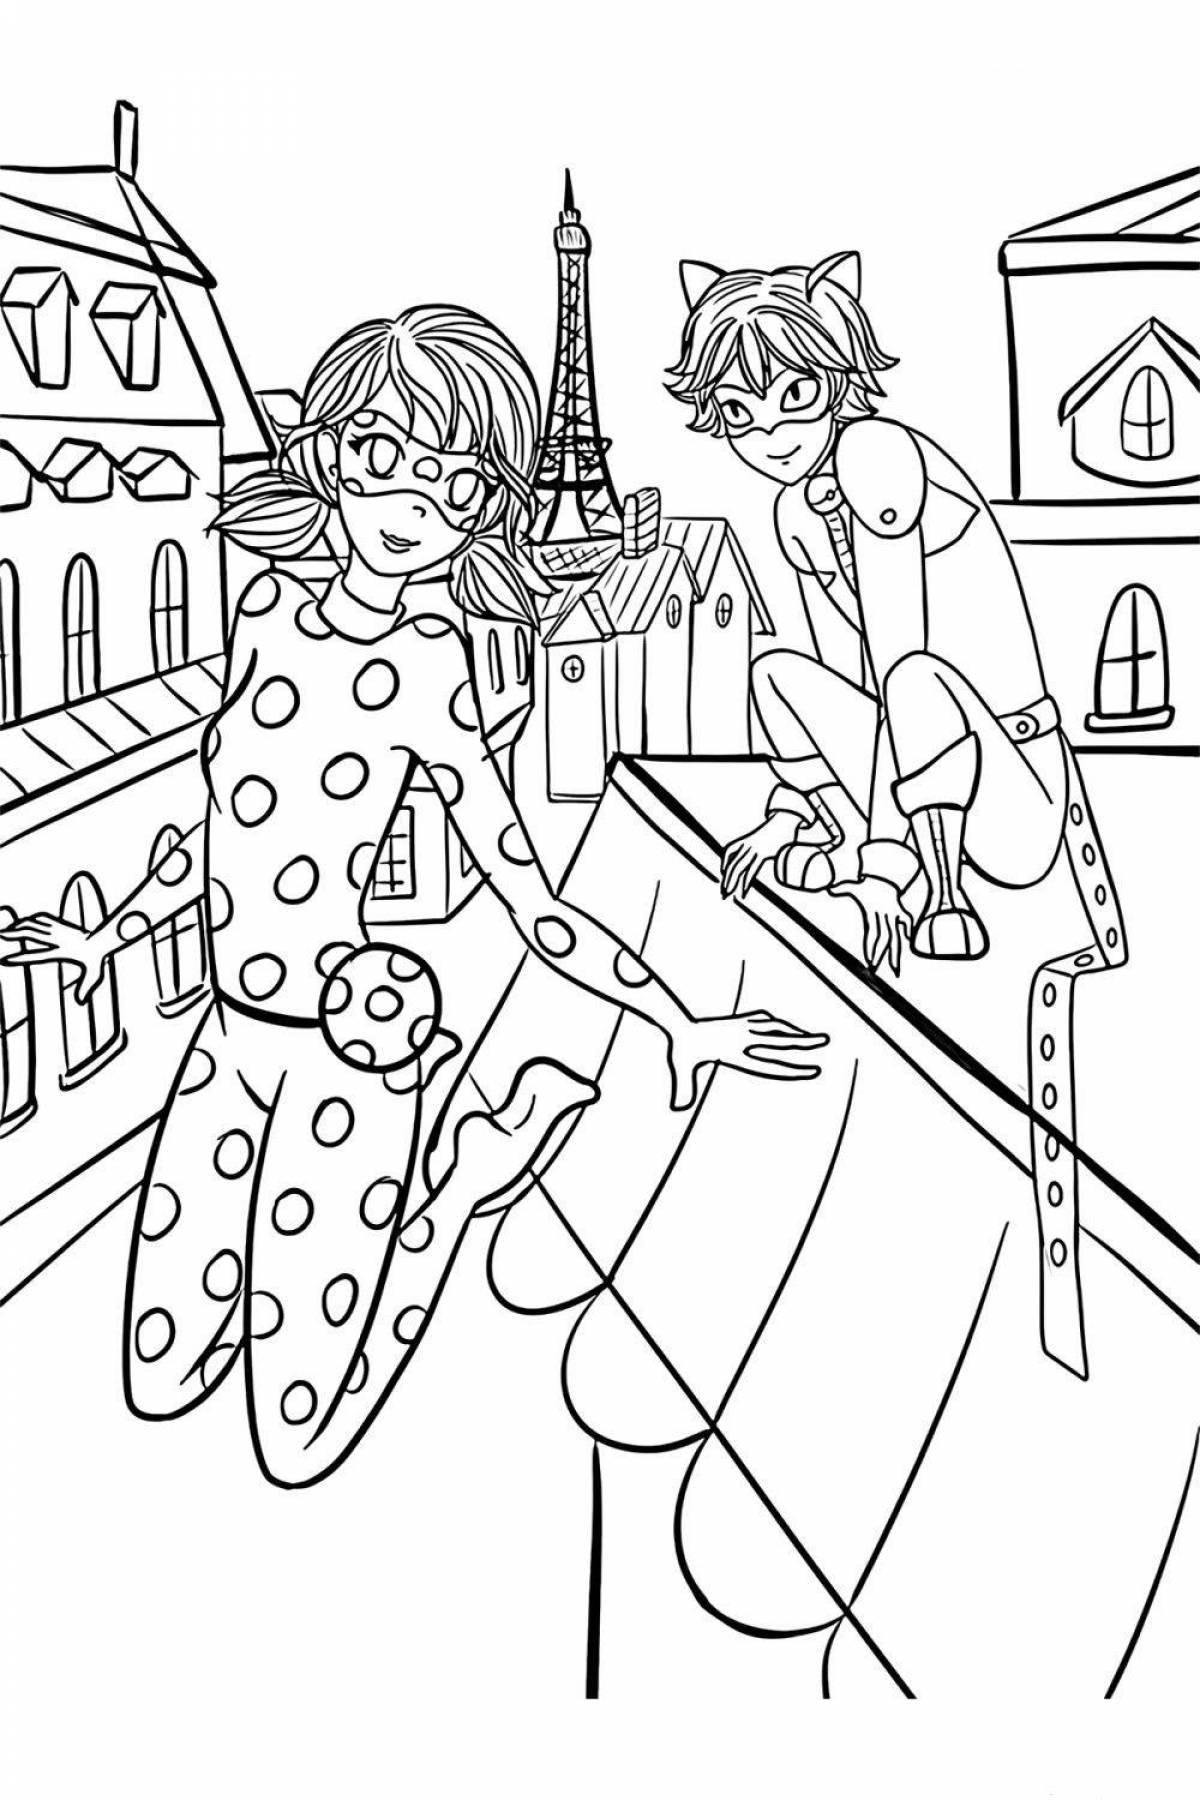 Fancy ladybug and super cat coloring pages for kids